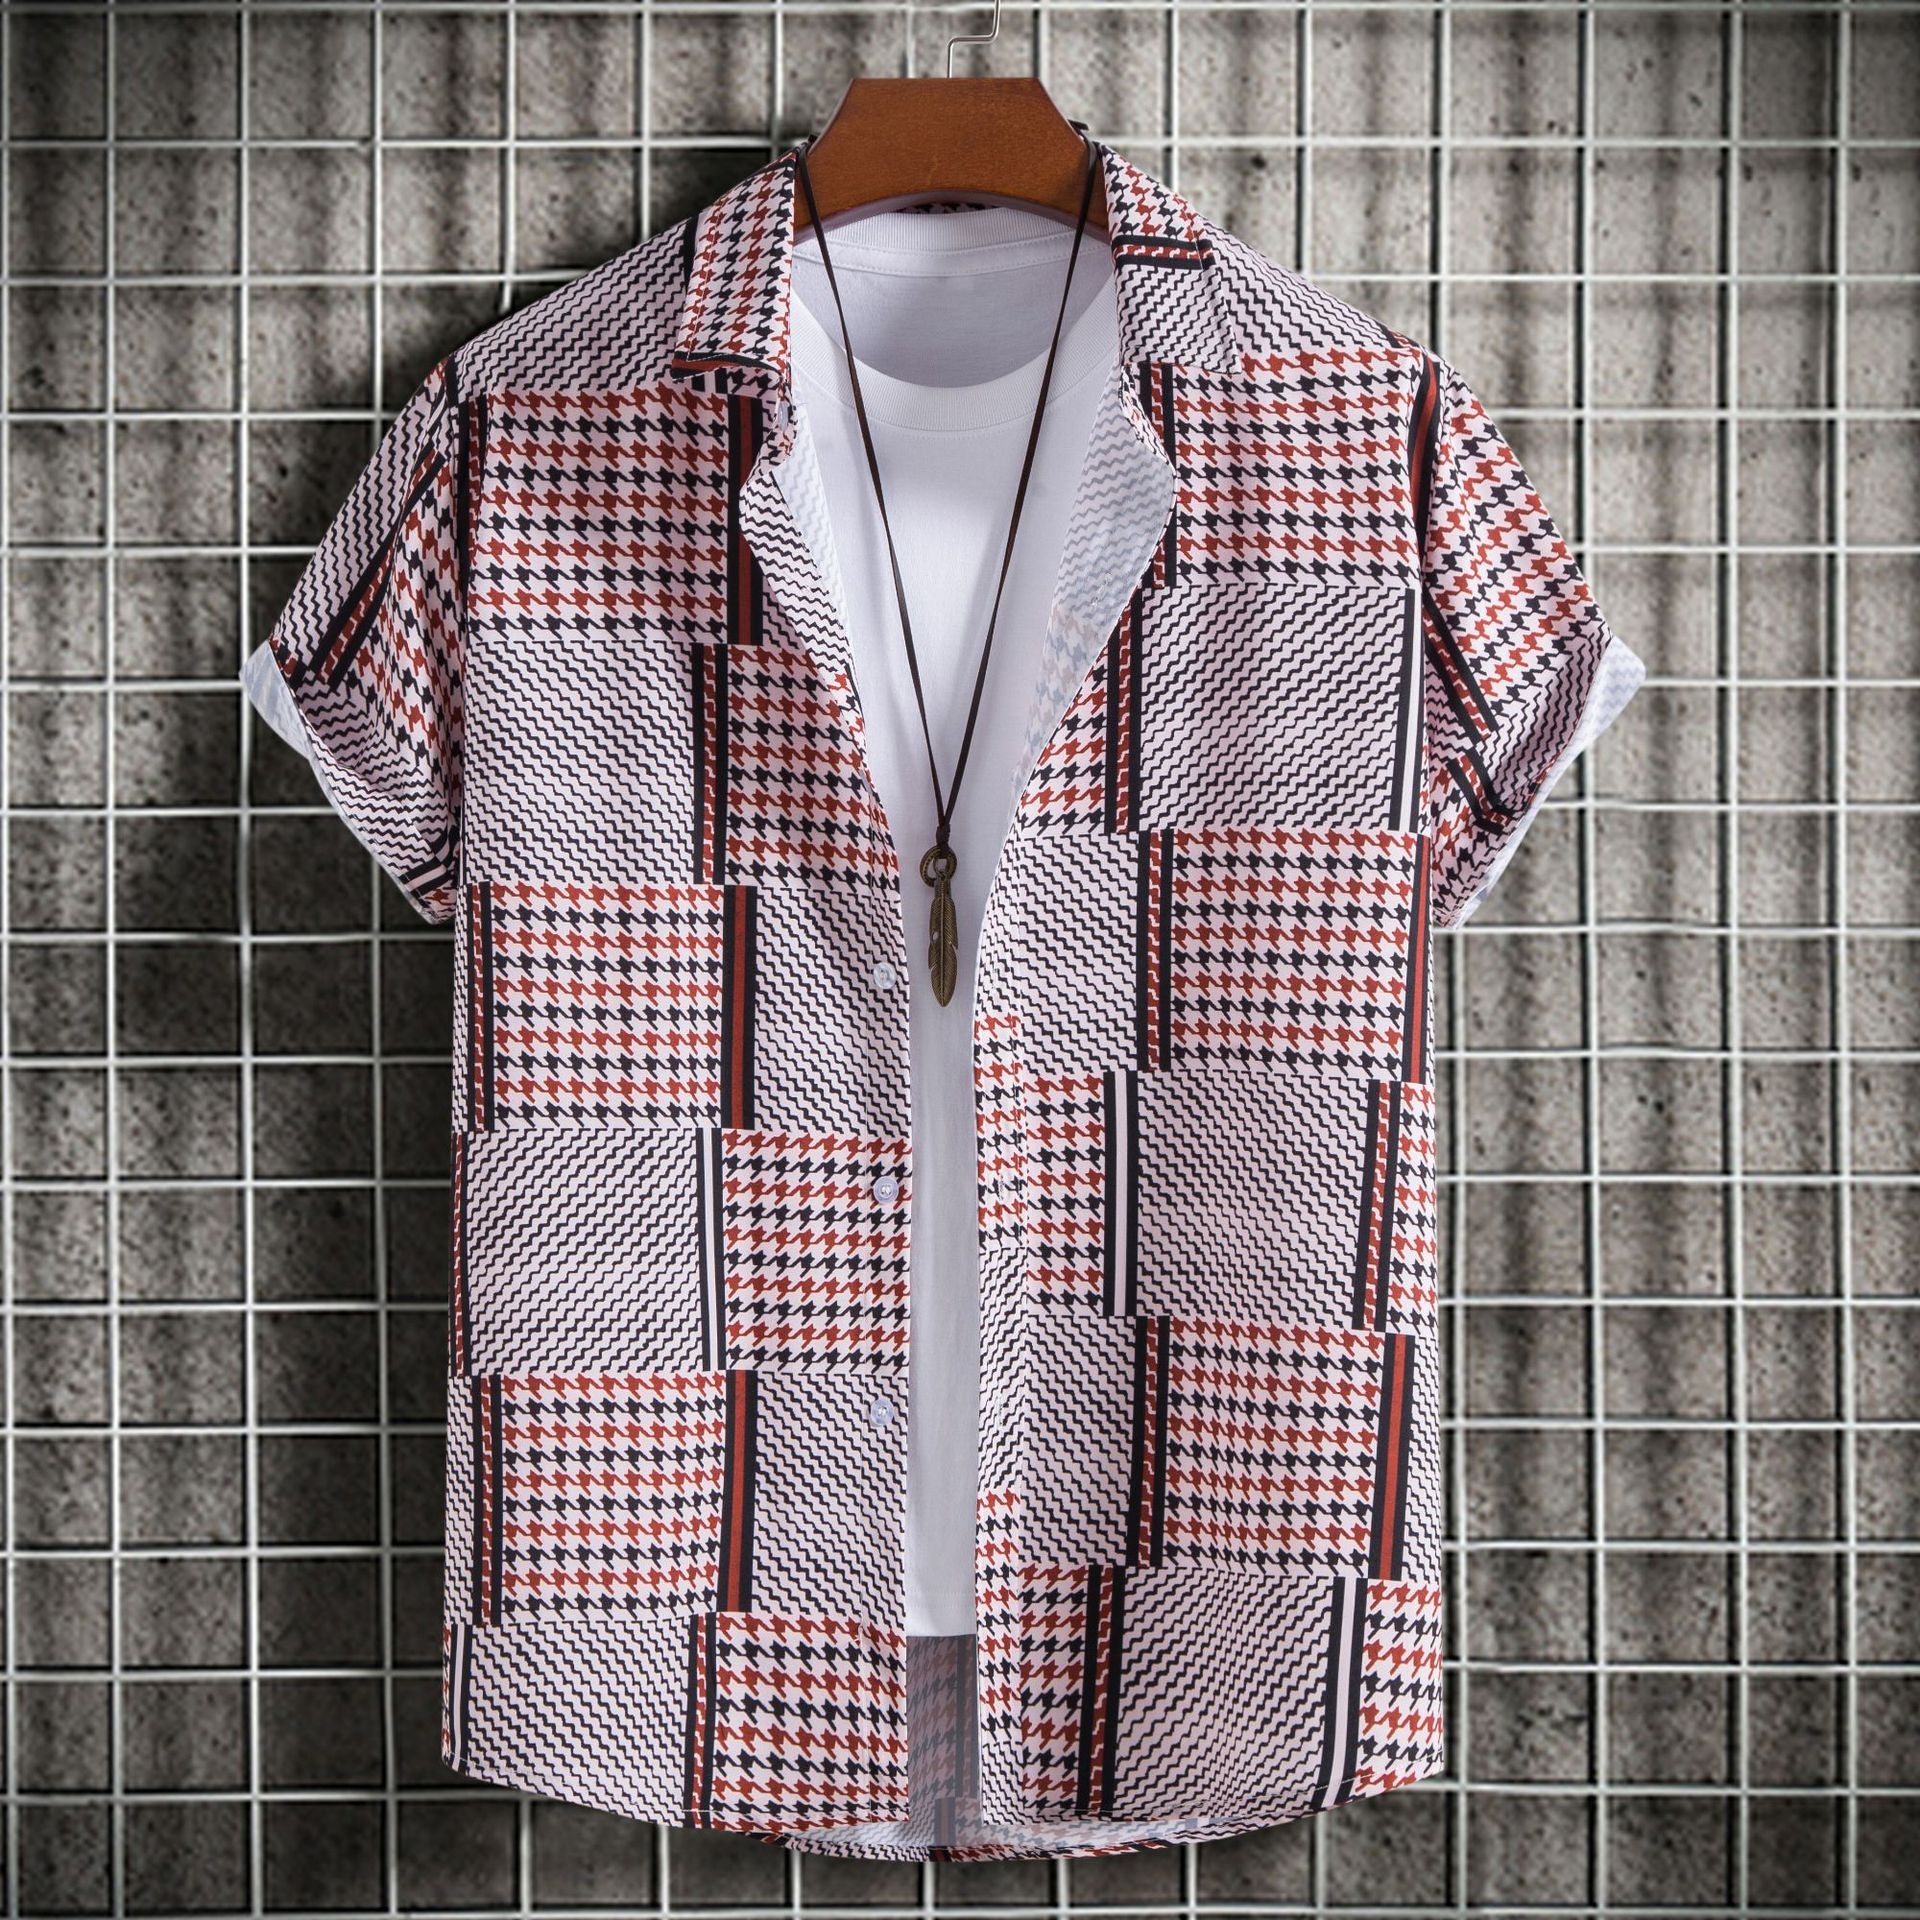 C224 - Men's Fashion Slim-fit Printed Short Sleeve Button Up Shirts - mens button up shirt at TFC&H Co.